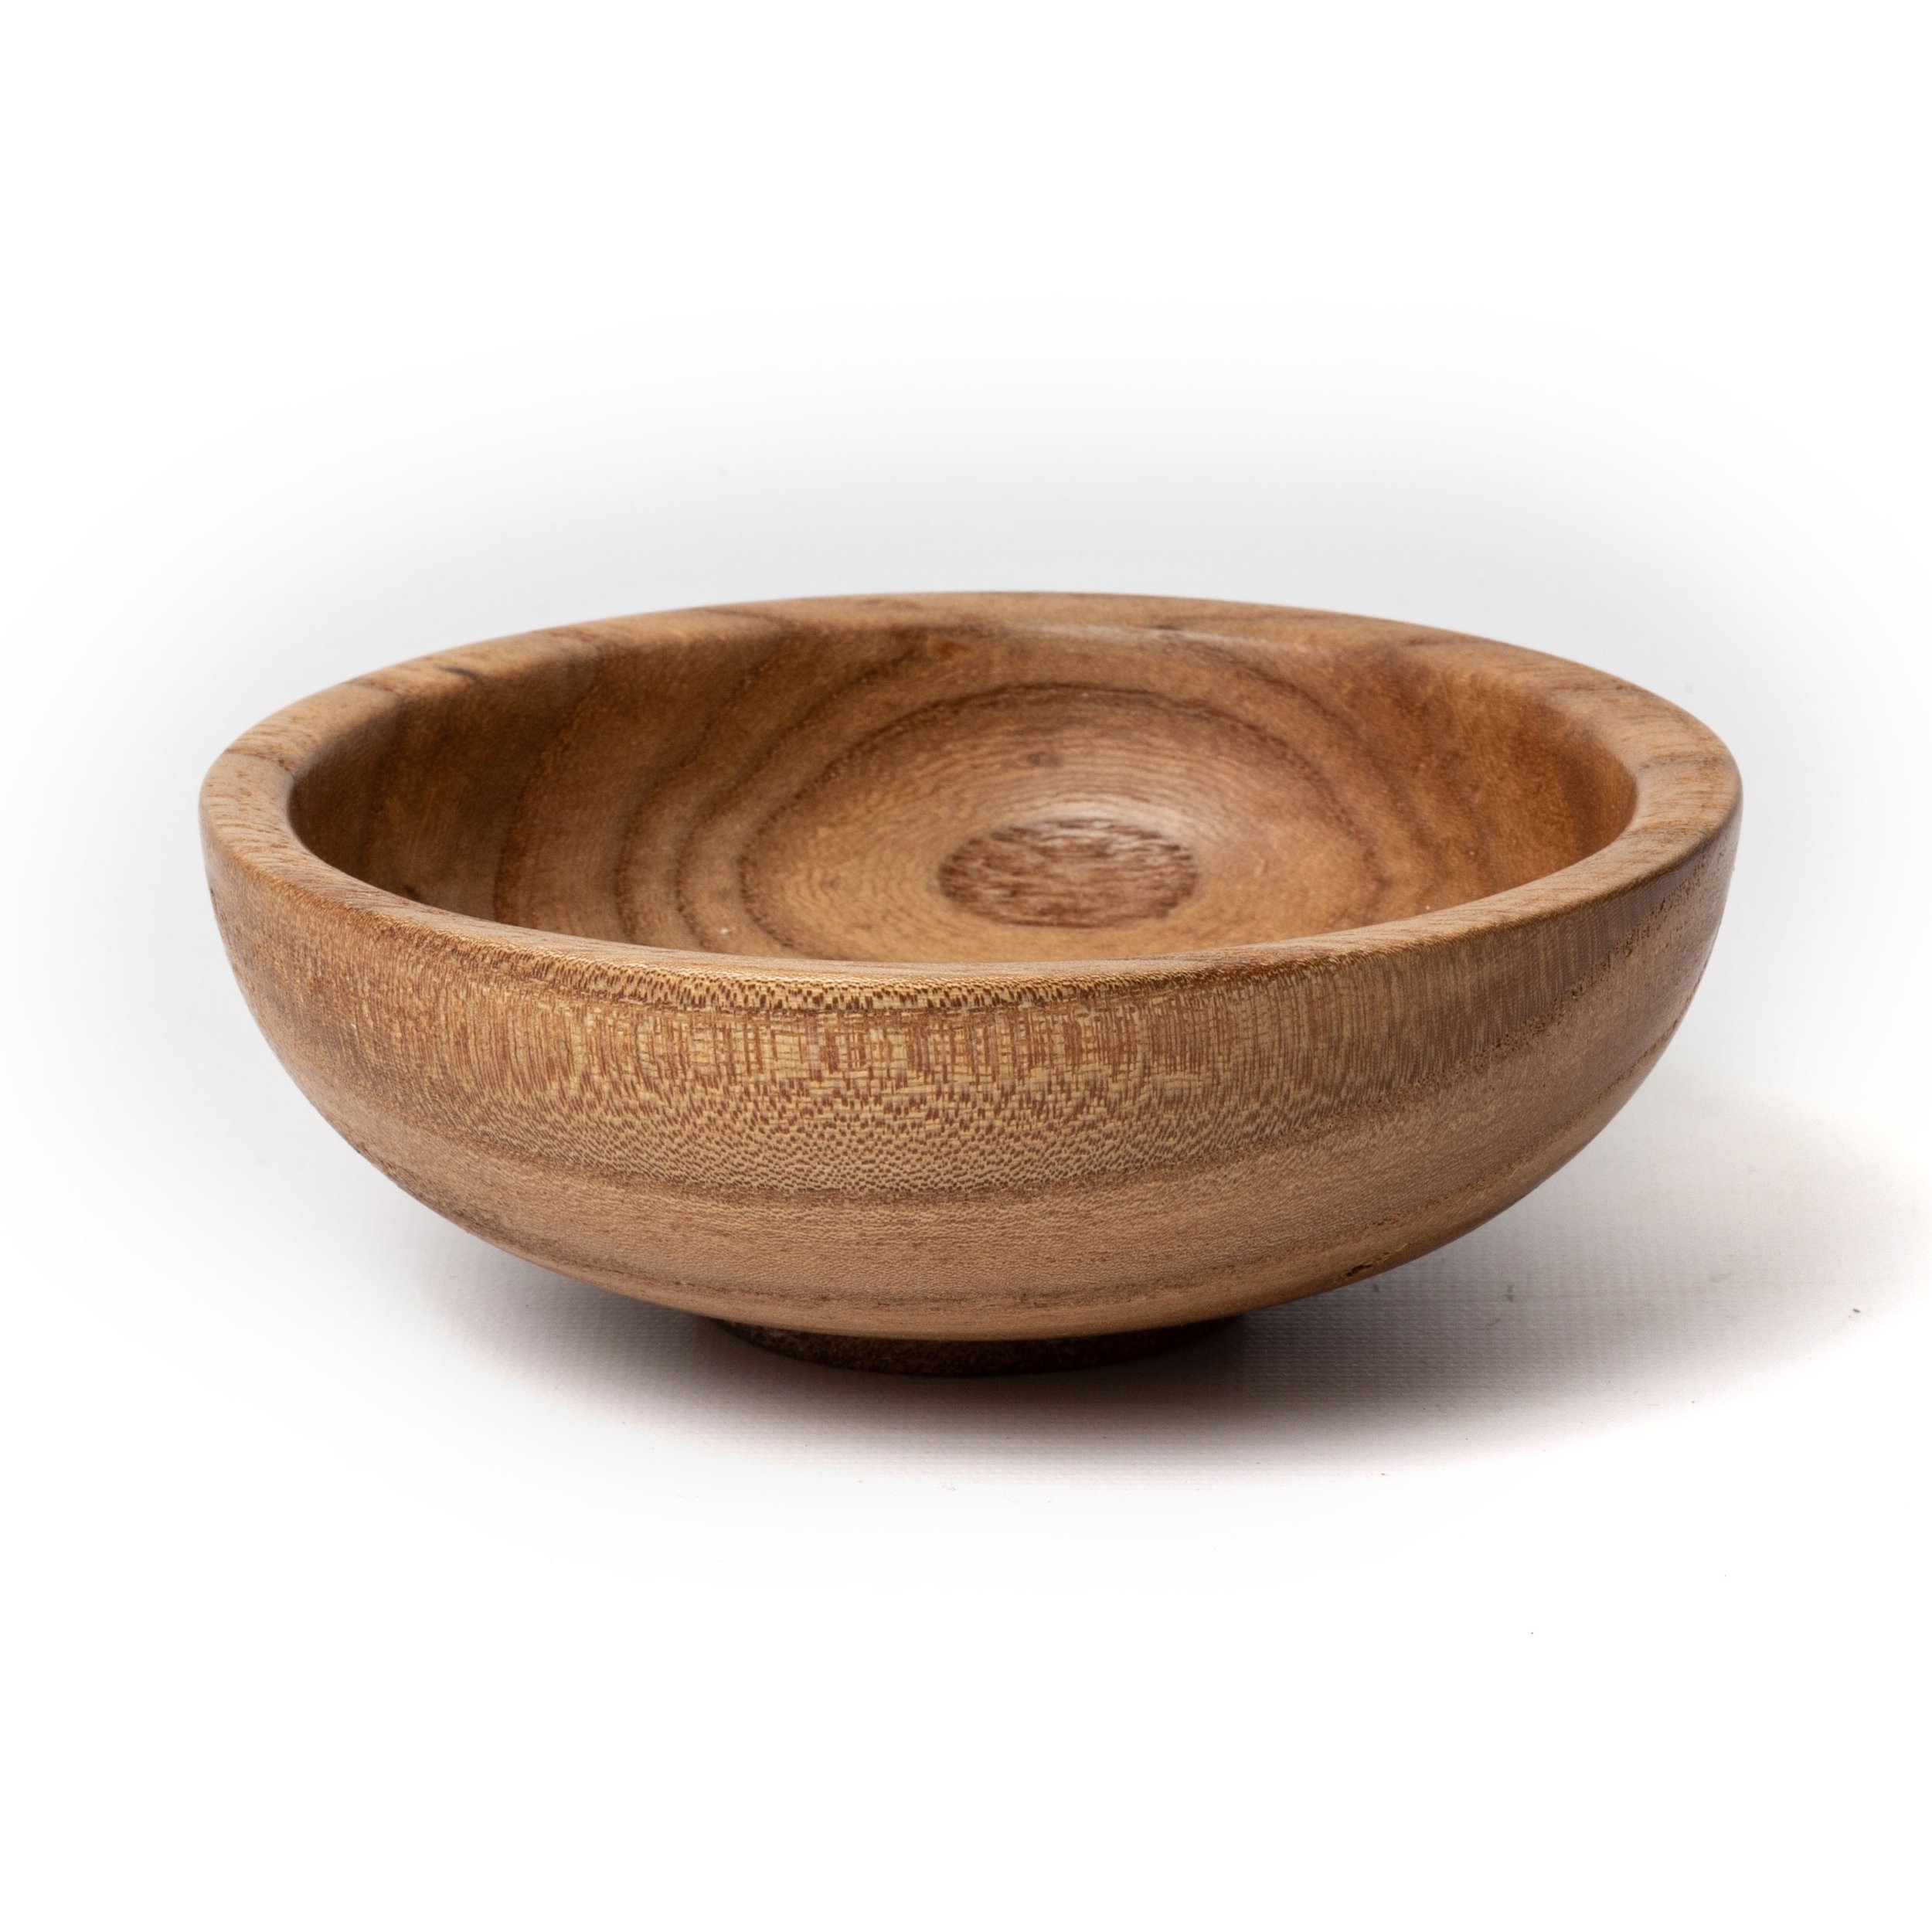 Elm - first bowl turned at home, 5" dia.